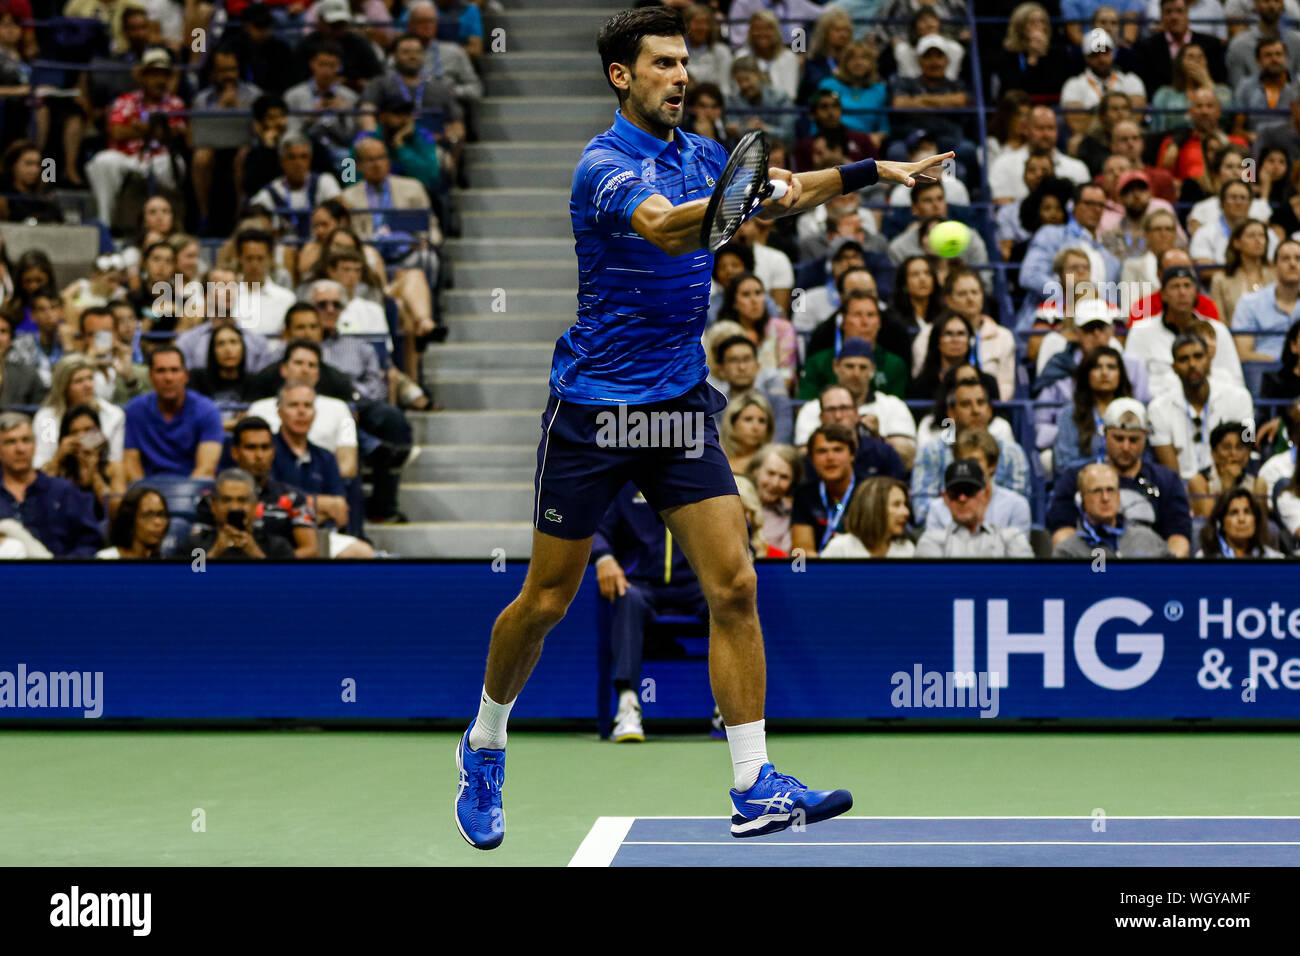 New York, USA. 01st Sep, 2019. Novak Djokovic of Serbia hits a forehand during his match against Stan Wawrinka of Switzerland in the third round on Arthur Ashe Stadium at the USTA Billie Jean King National Tennis Center on September 01, 2019 in New York City. Credit: Independent Photo Agency/Alamy Live News Stock Photo